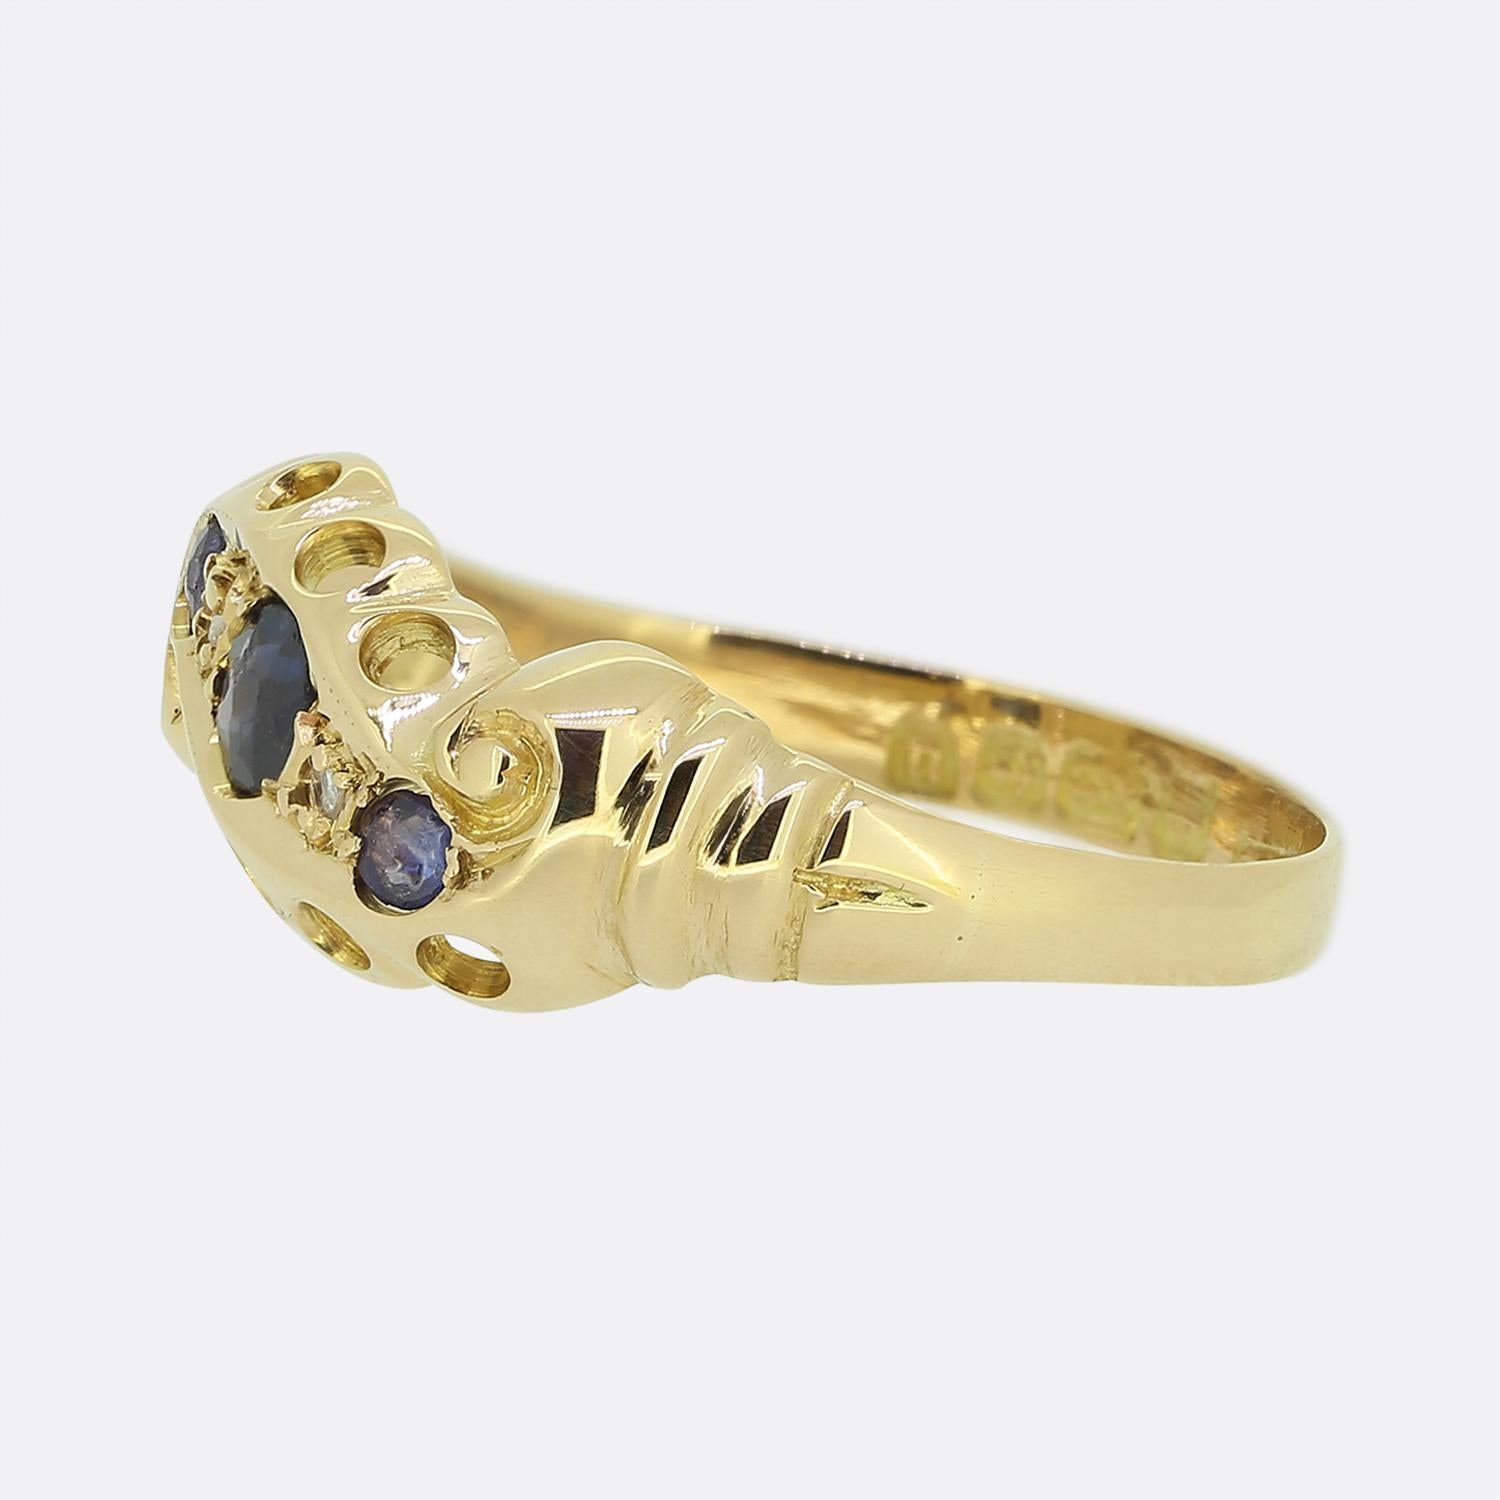 Here we have a delightful three-stone twist ring dating back to the early stages of the 20th century. This 18ct antique piece showcases three round faceted navy blue sapphires in a diagonal formation across the face with a duo of rose cut diamonds